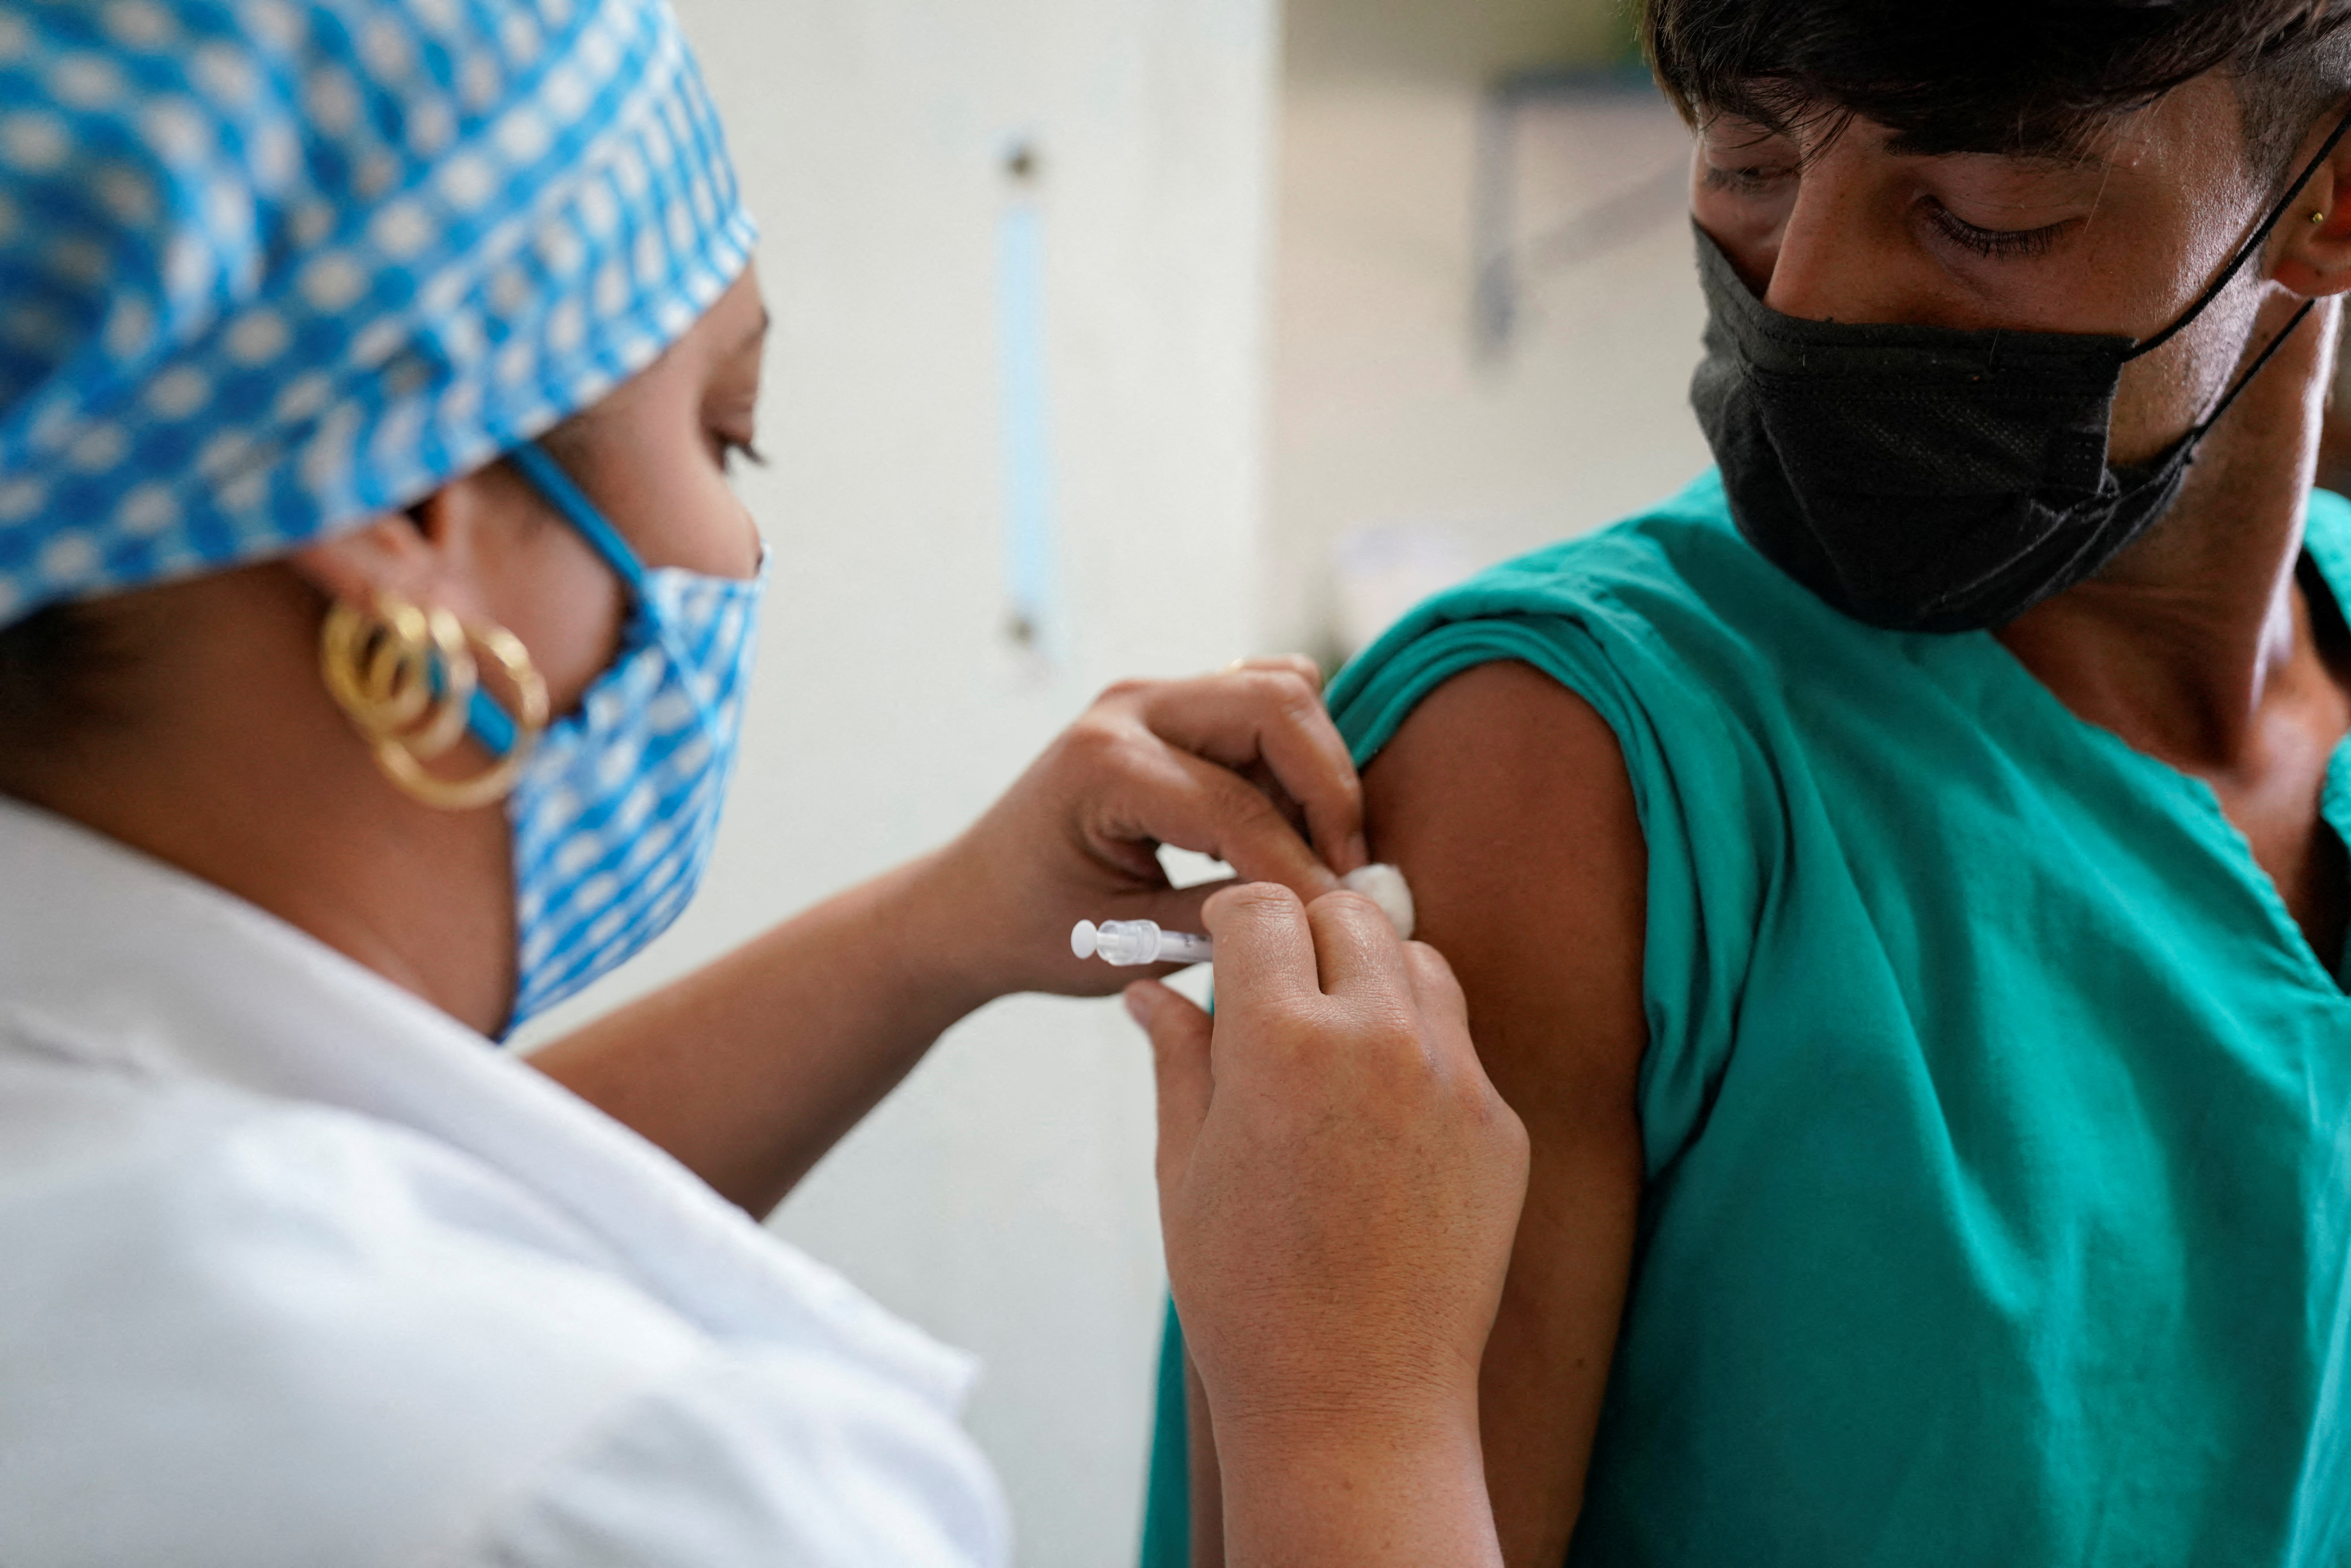 Cuba soars to near top of world vaccination charts